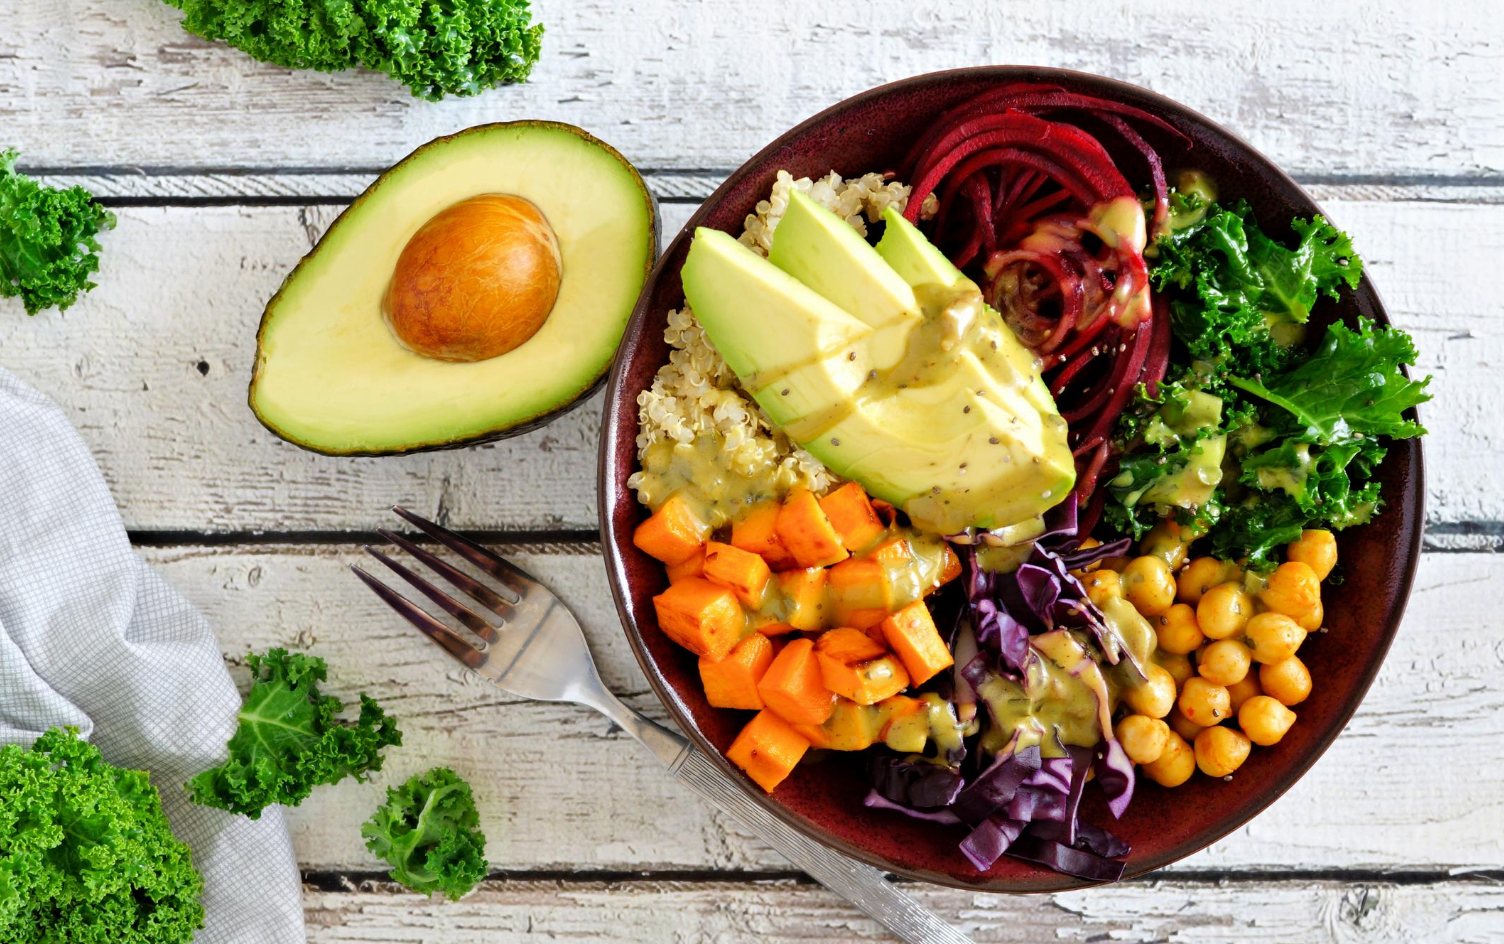 healthy bowl of food with avocado